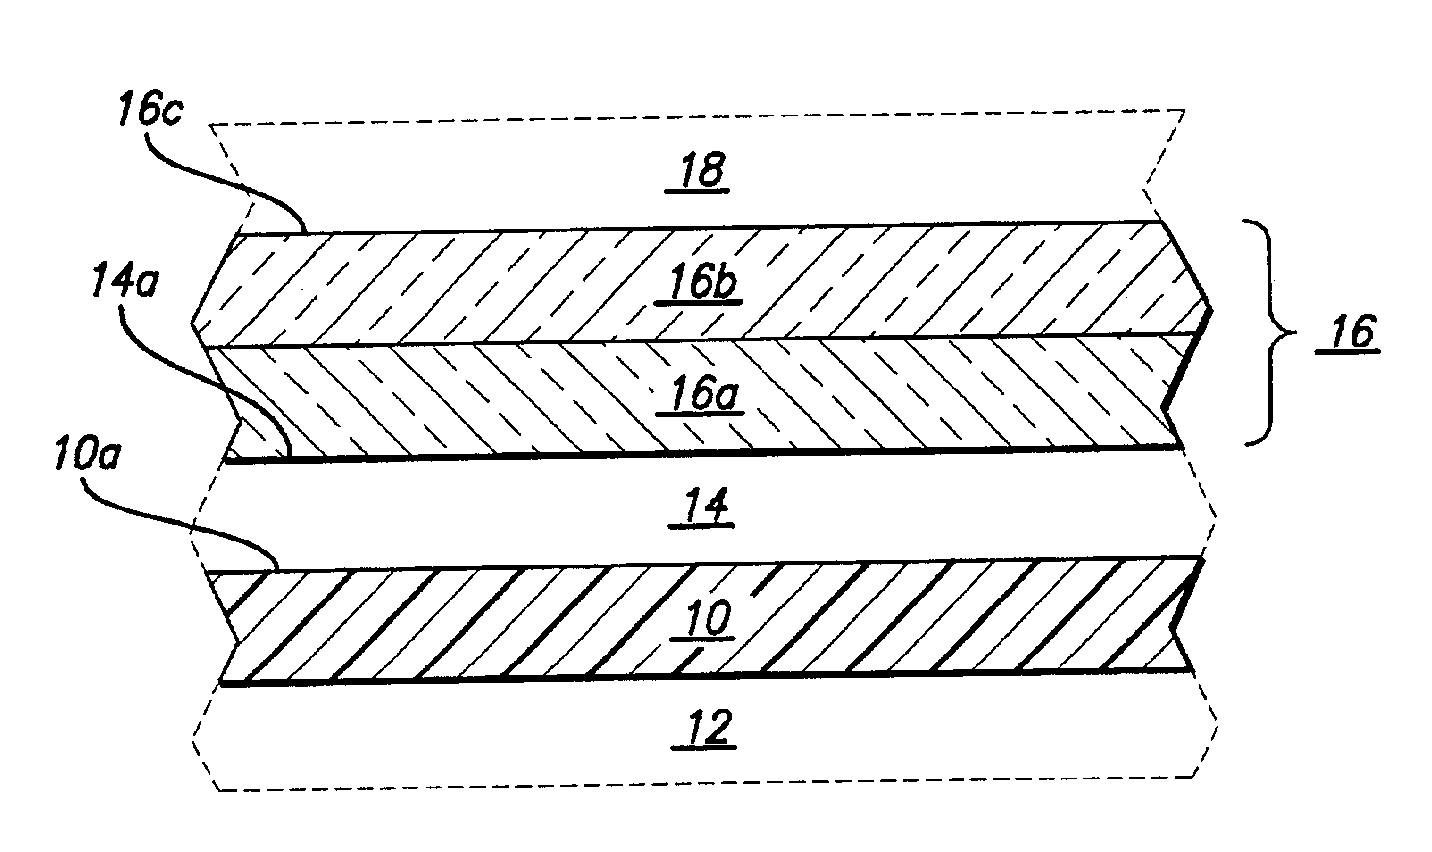 Porous inkjet receiver layer with a binder gradient